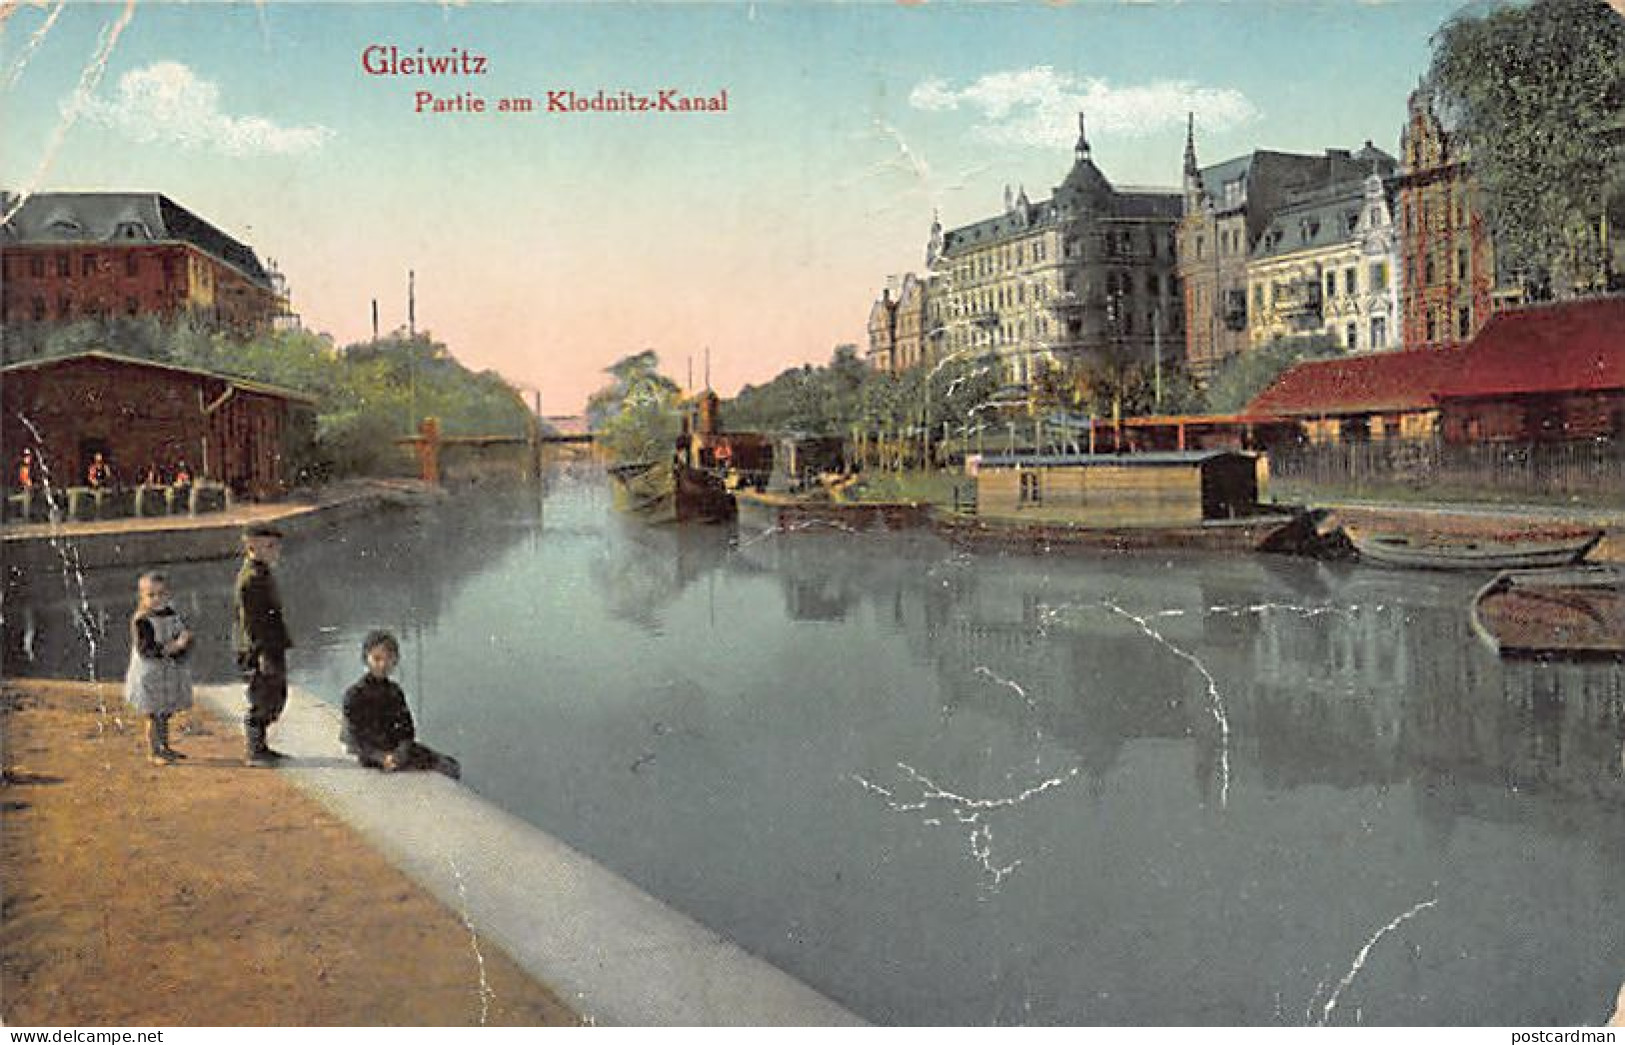 Poland - GLIWICE Gleiwitz - Partie Am Klodnitz-Kanal - SEE SCANS FOR CONDITION - Publ. Unknown  - Poland